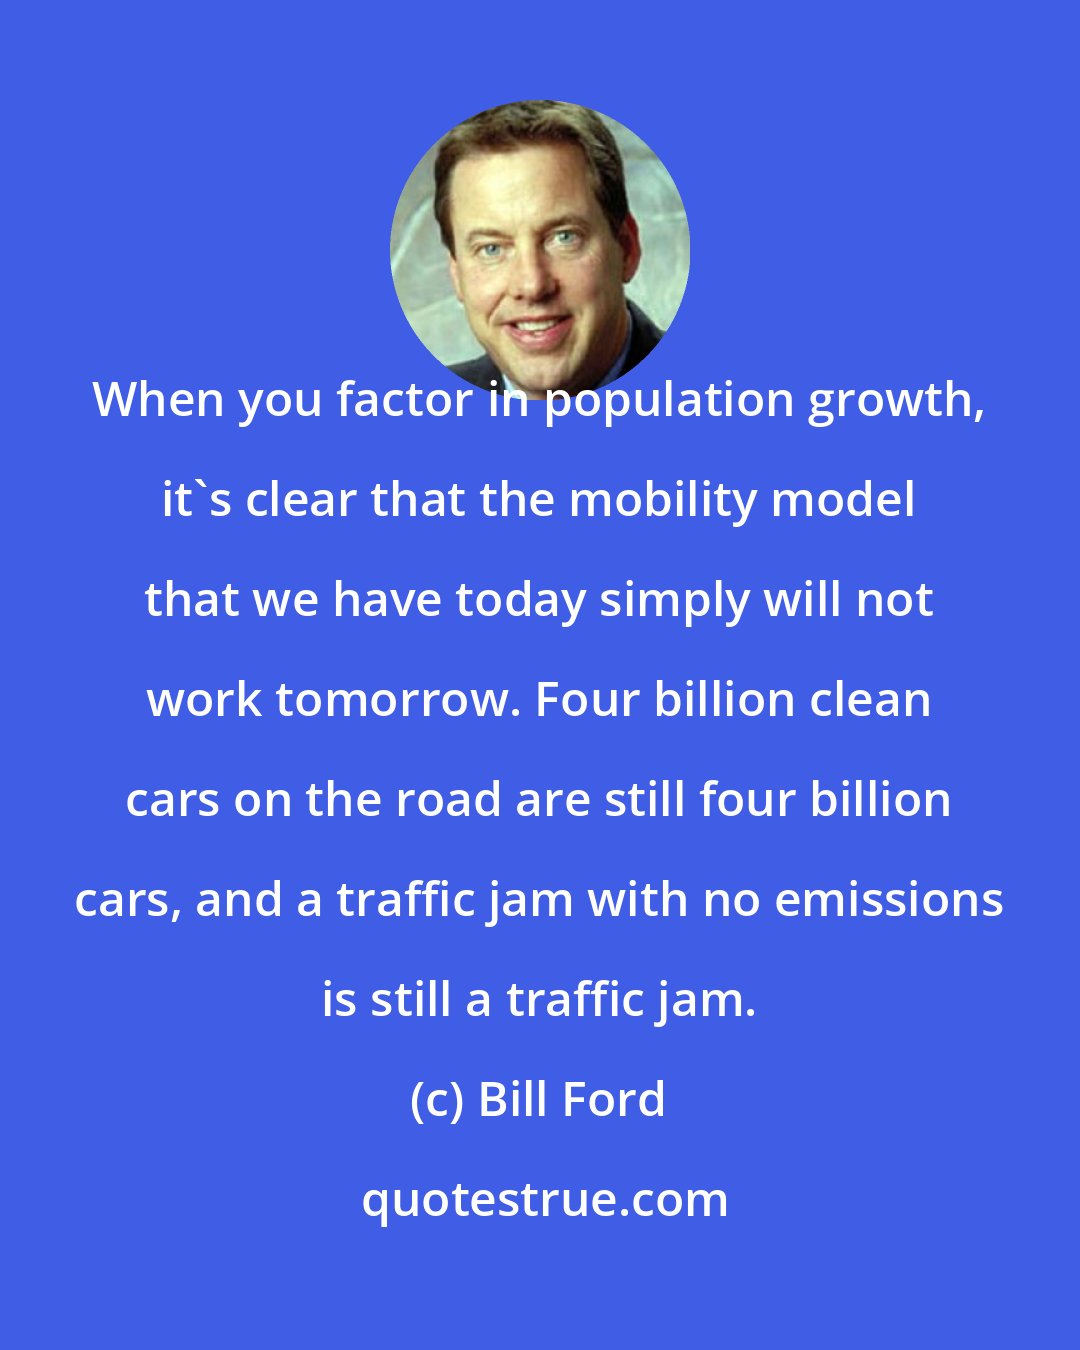 Bill Ford: When you factor in population growth, it's clear that the mobility model that we have today simply will not work tomorrow. Four billion clean cars on the road are still four billion cars, and a traffic jam with no emissions is still a traffic jam.